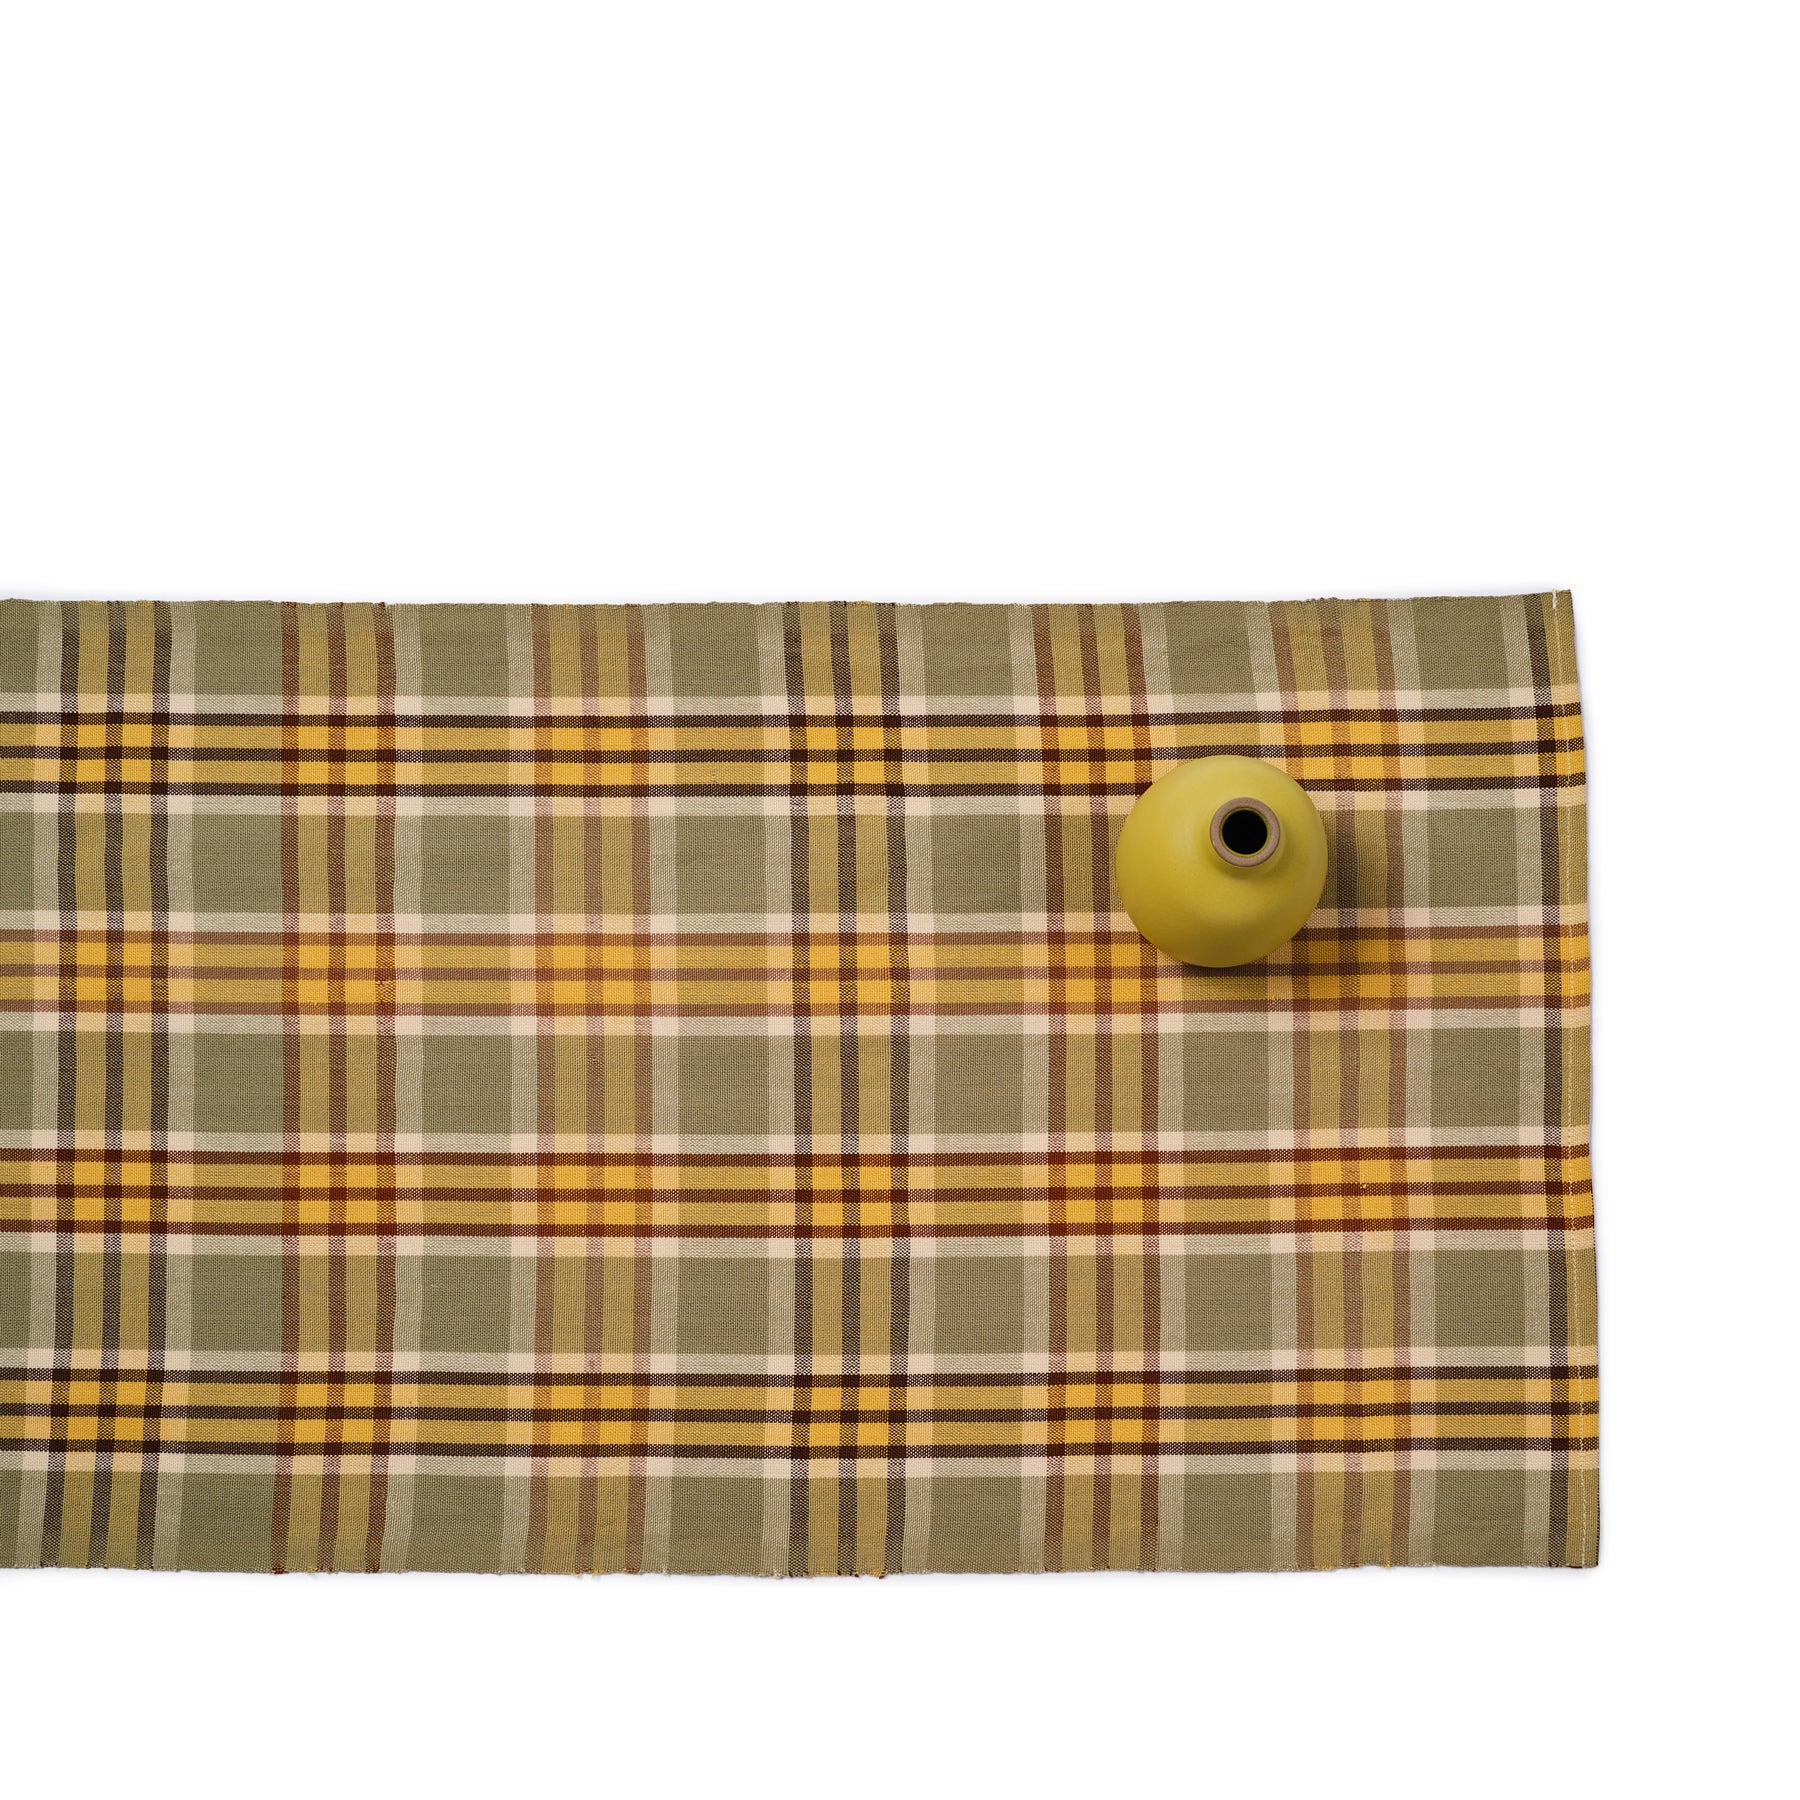 Provencial Plaid Table Runner in Beige Claro Warp Zoom Image 1